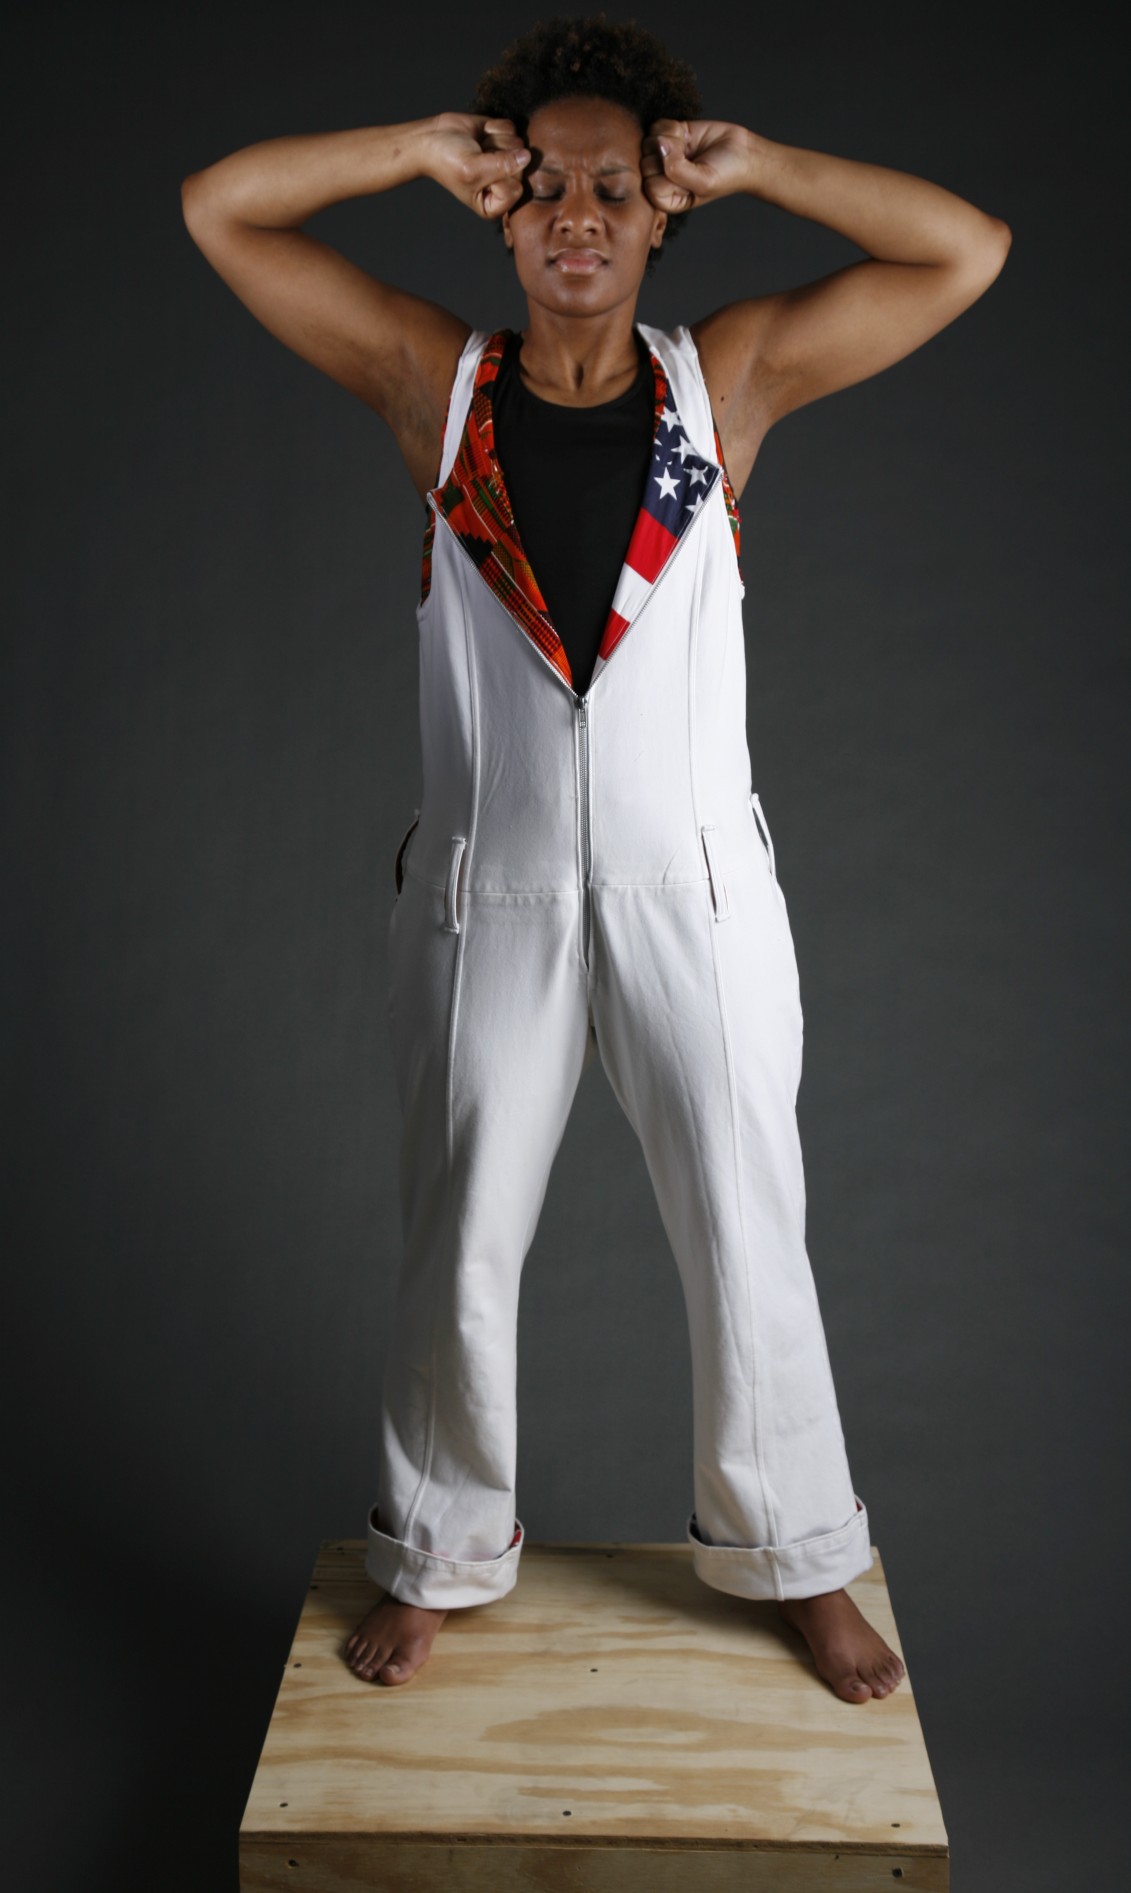 A professional photo of a woman standing tall with eyes closed and arms raised with elbows bent and fists pressed against her temples. She is wearing a white jumpsuit with the front unzipping to show the American flag on the inside.